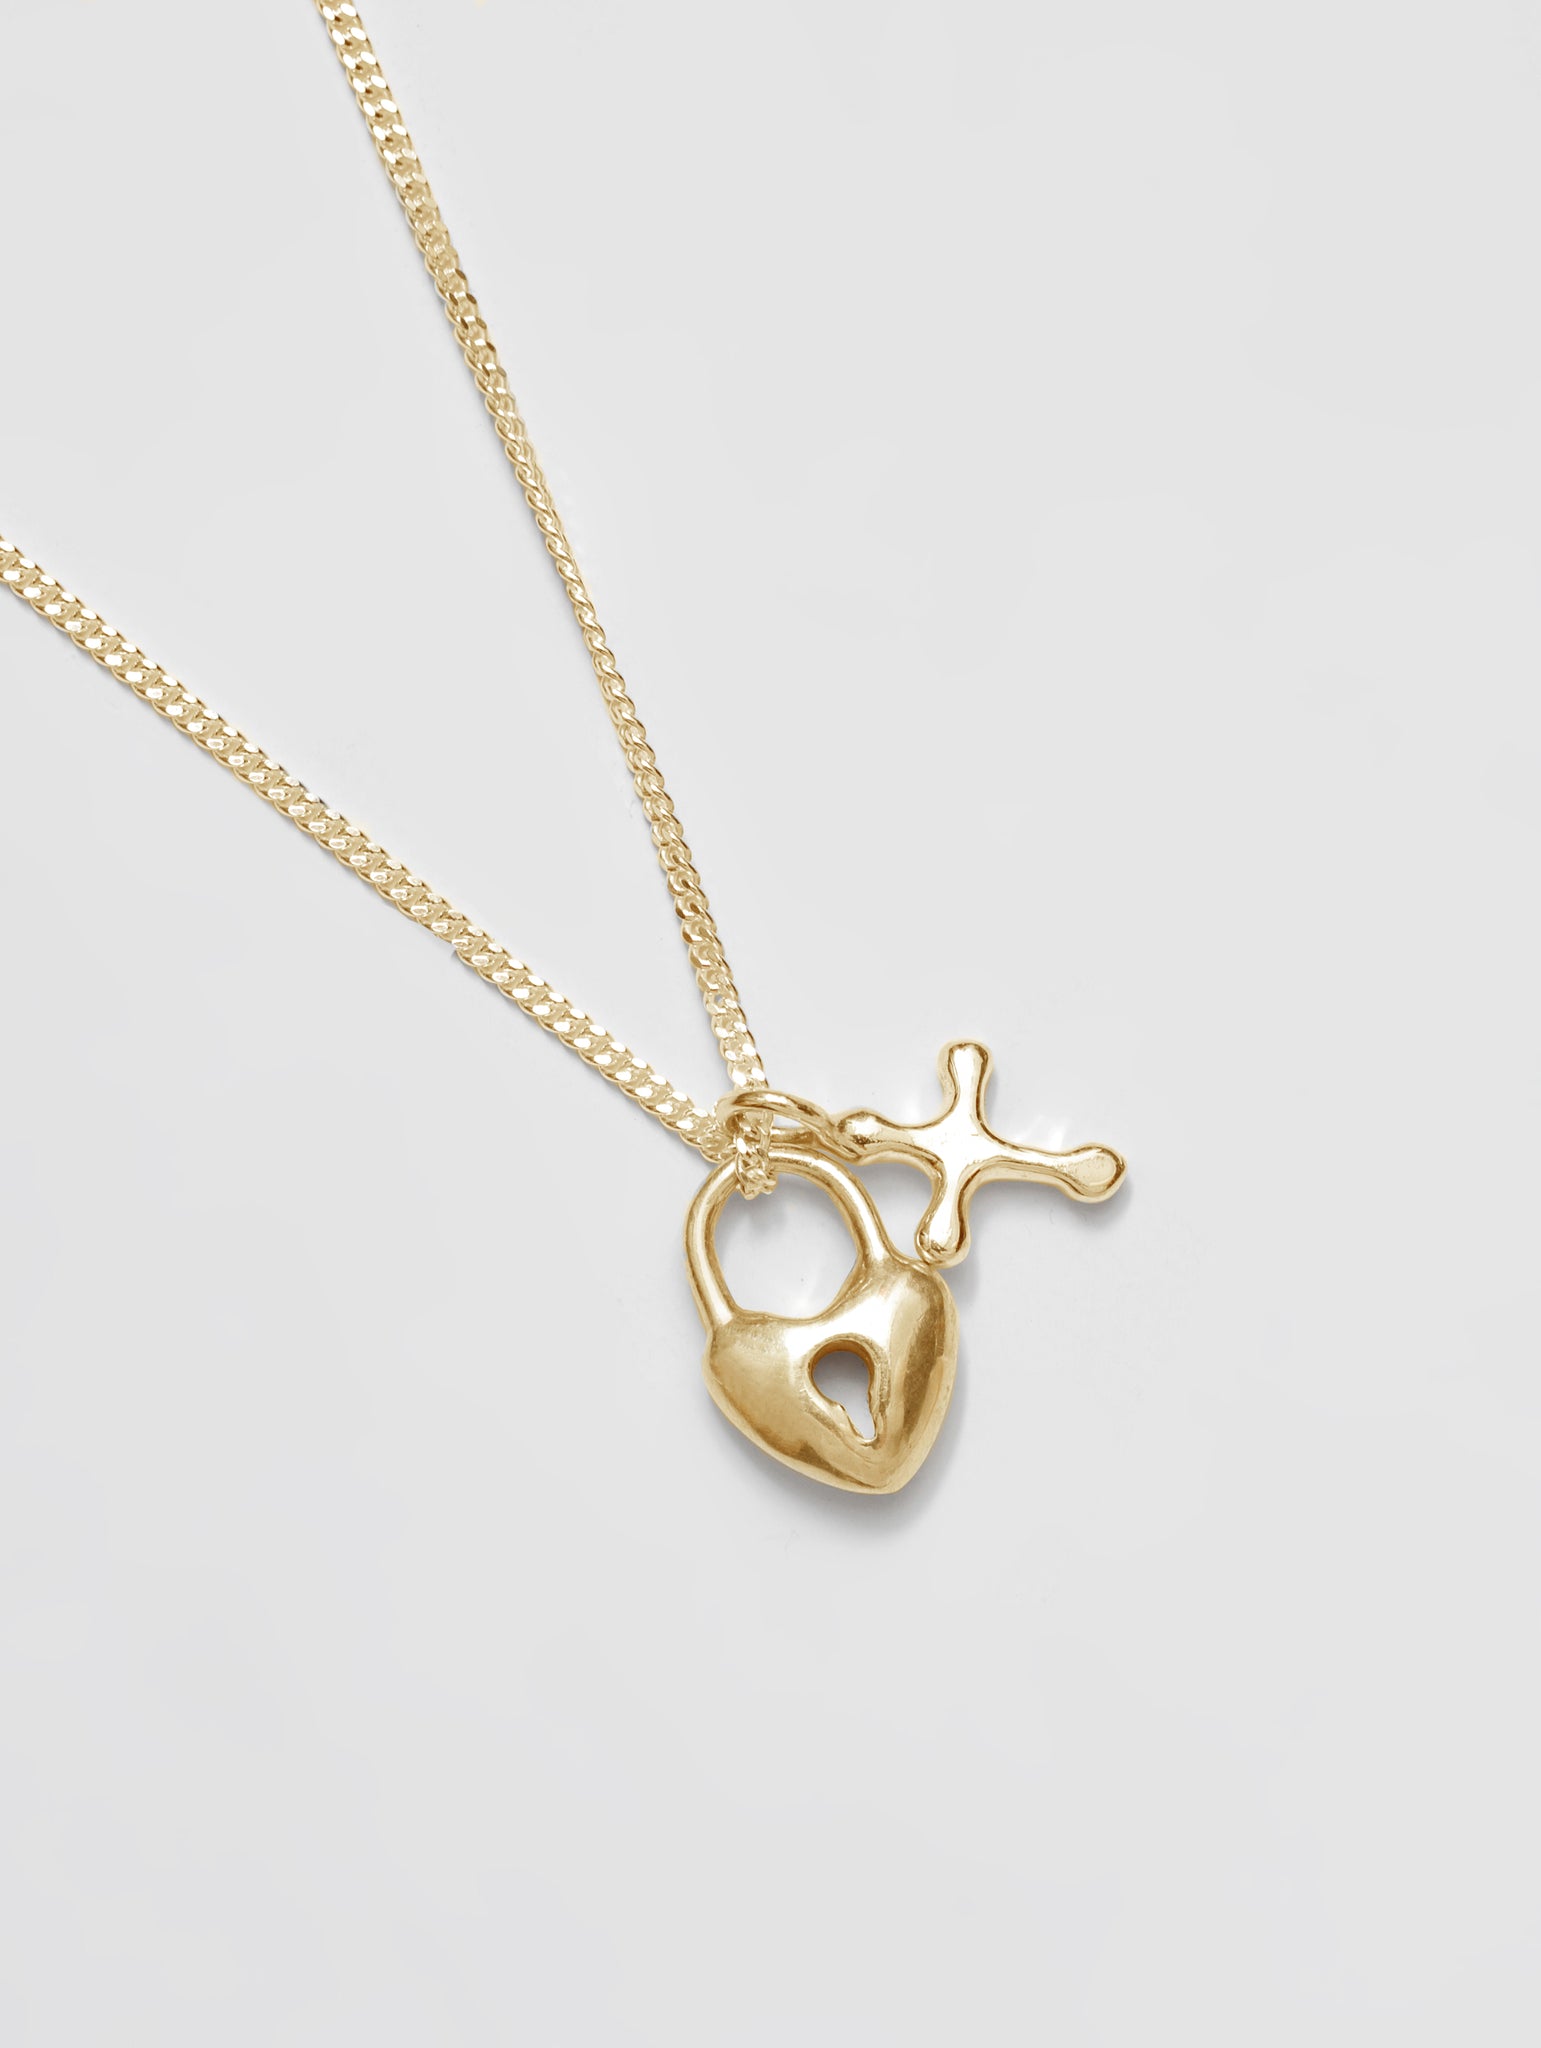 Mini Heart Lock and Cross Charm Necklace in Gold